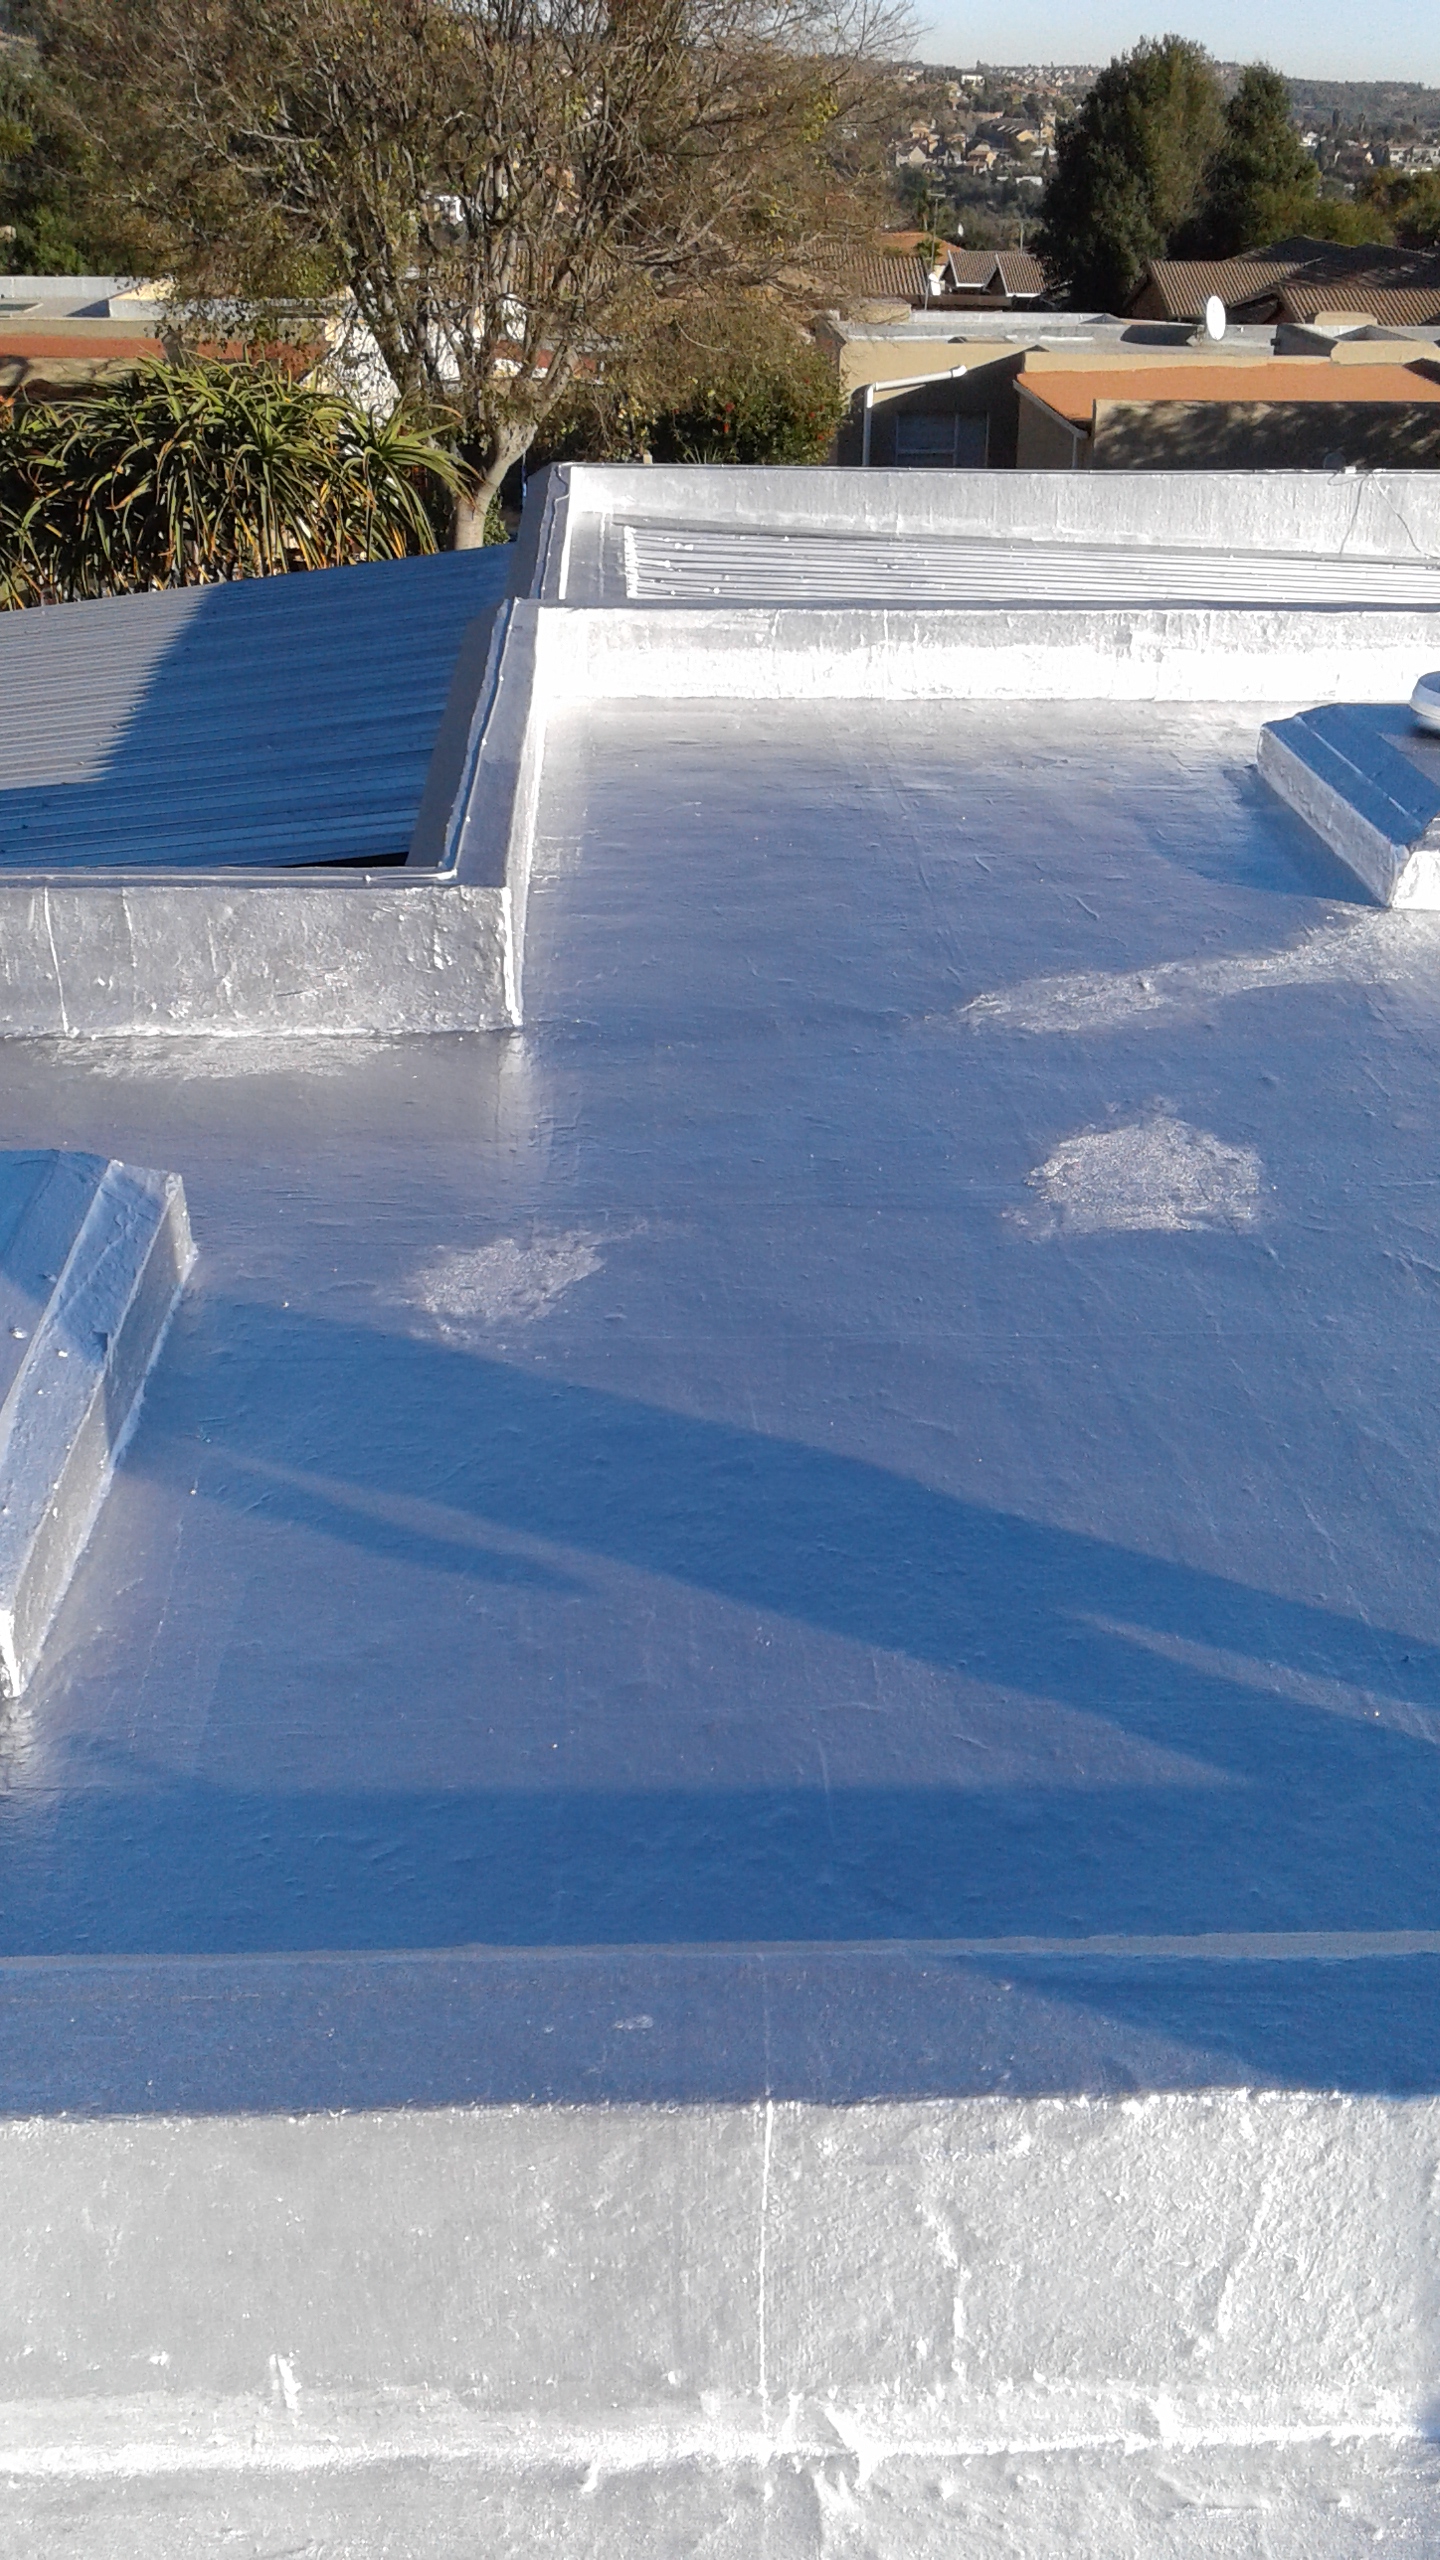 LEAKING ROOFS???, LET US HELP FIX YOUR 'leaks'.